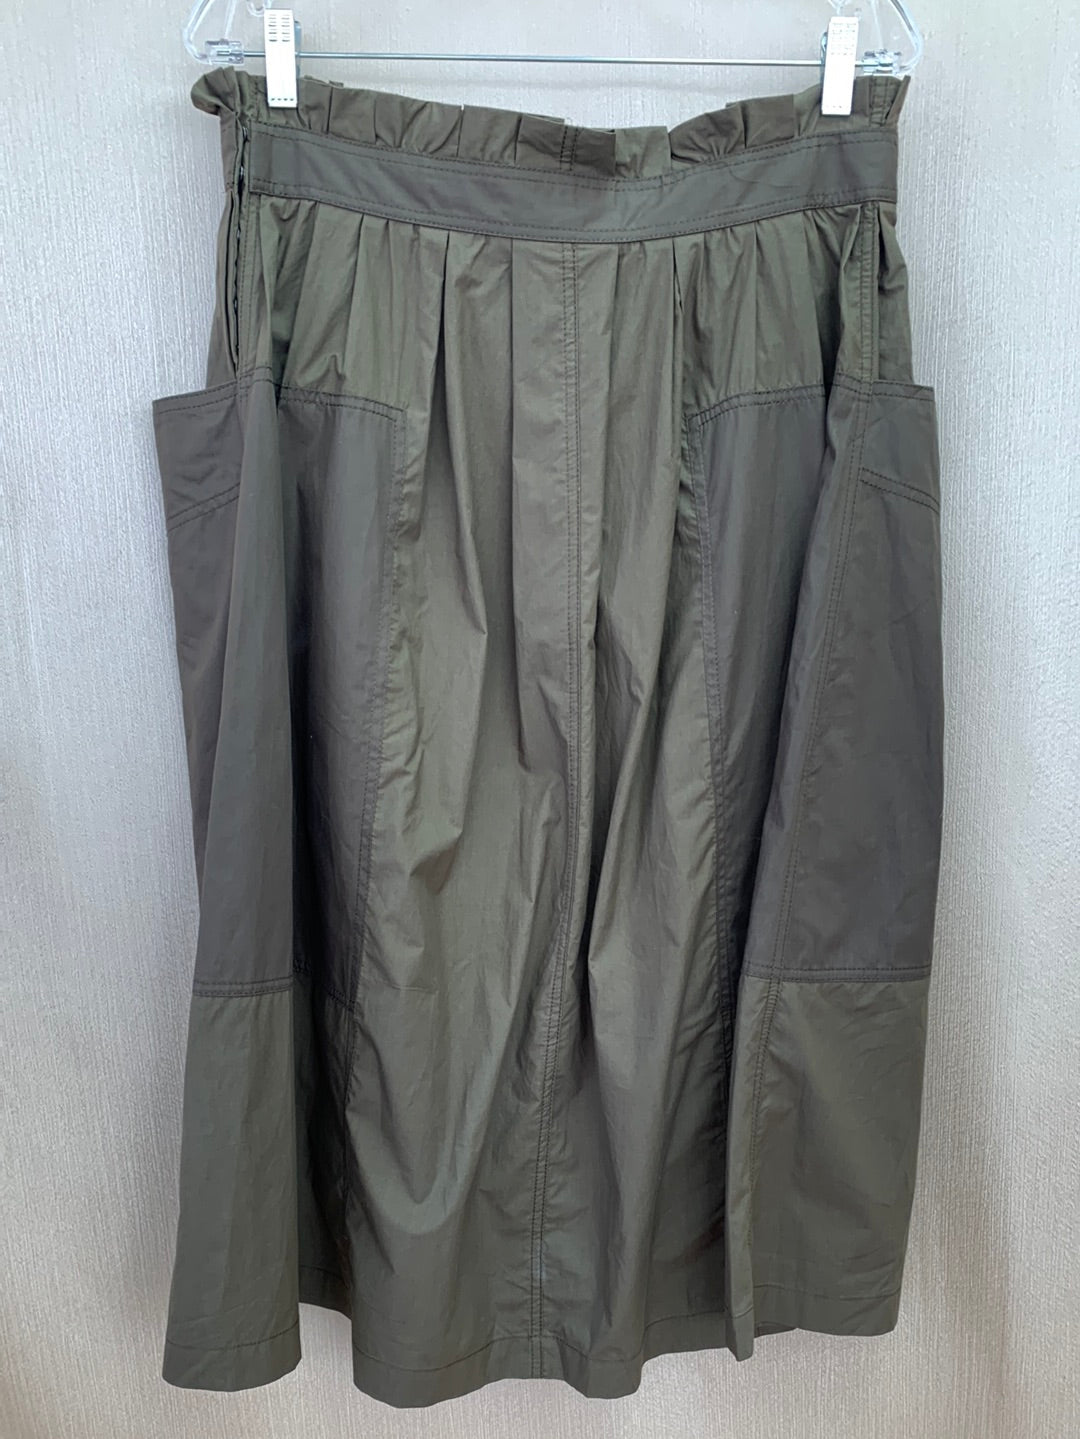 NWT - ZARA SRPLS army green Cotton Belted Cargo Midi Skirt - Large